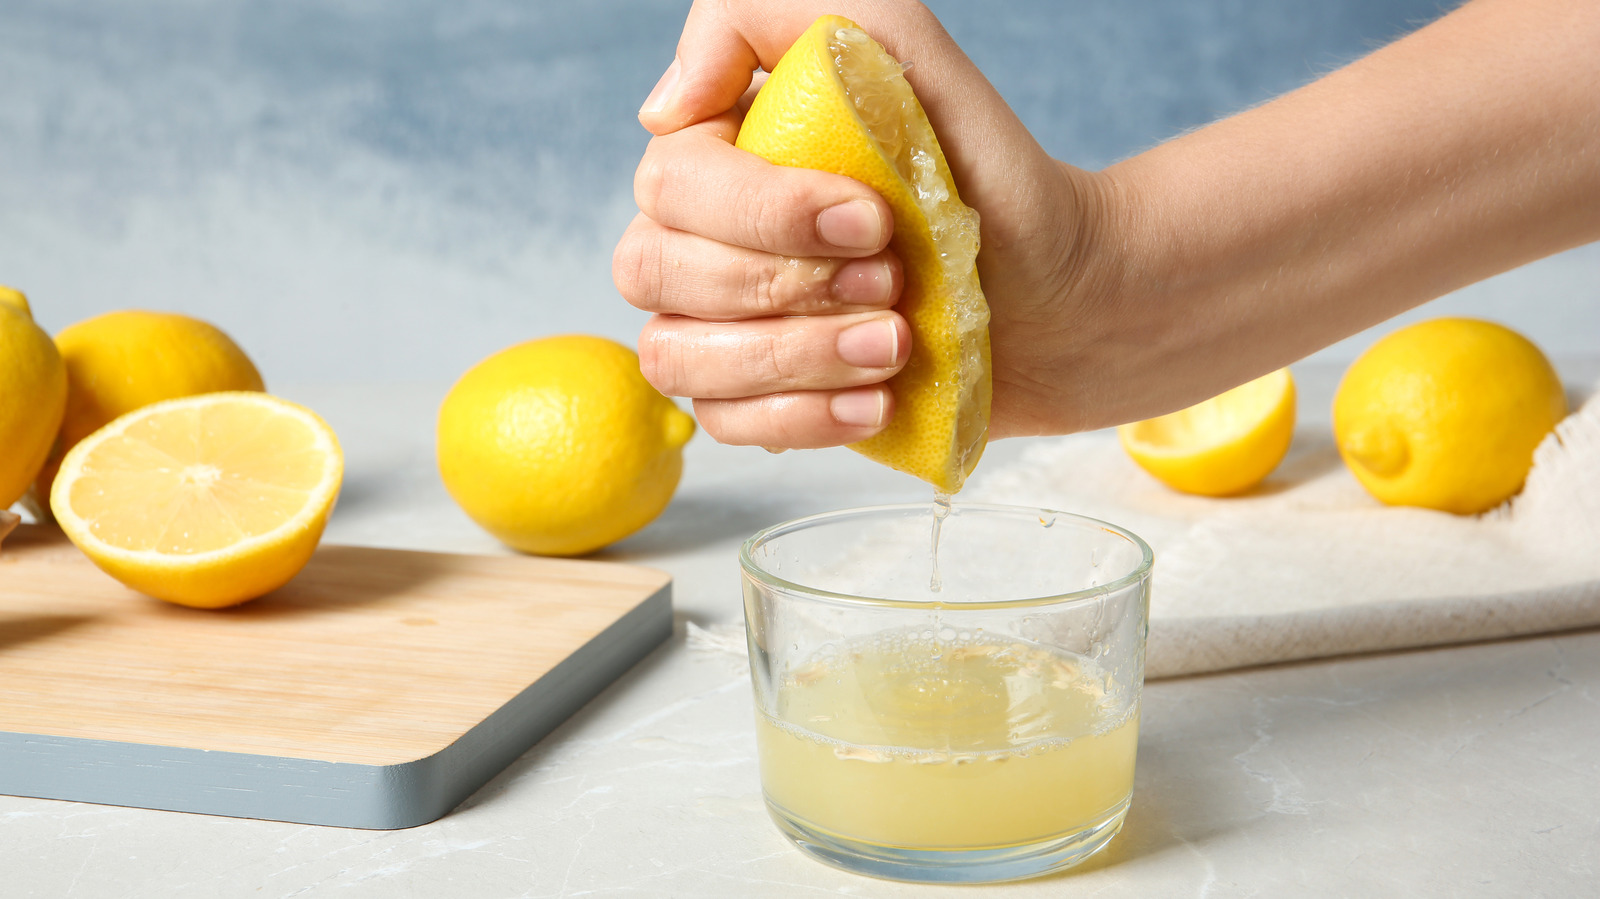 squeeze lemon to remove onion smell